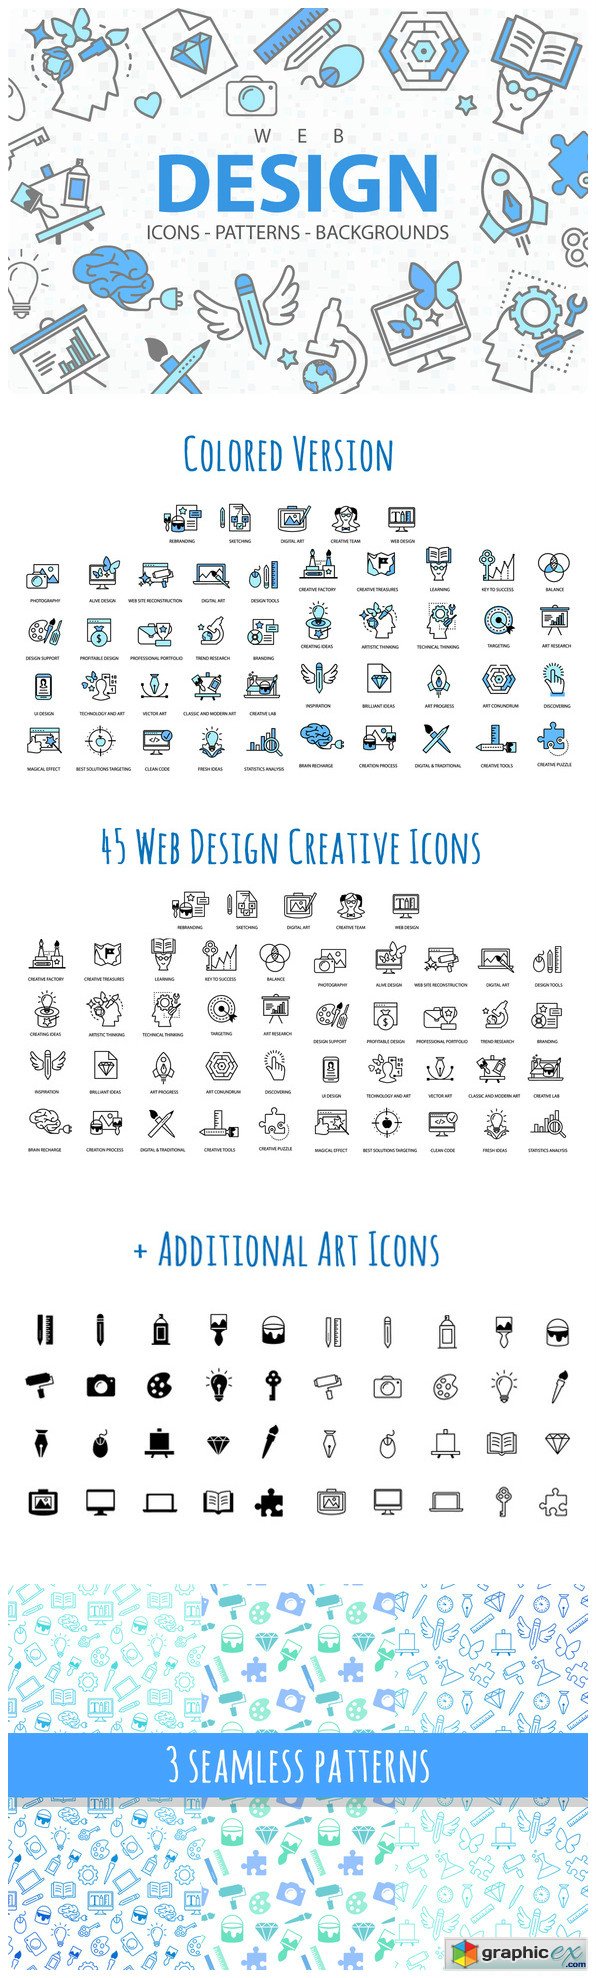 Web Design Icons Patterns and More